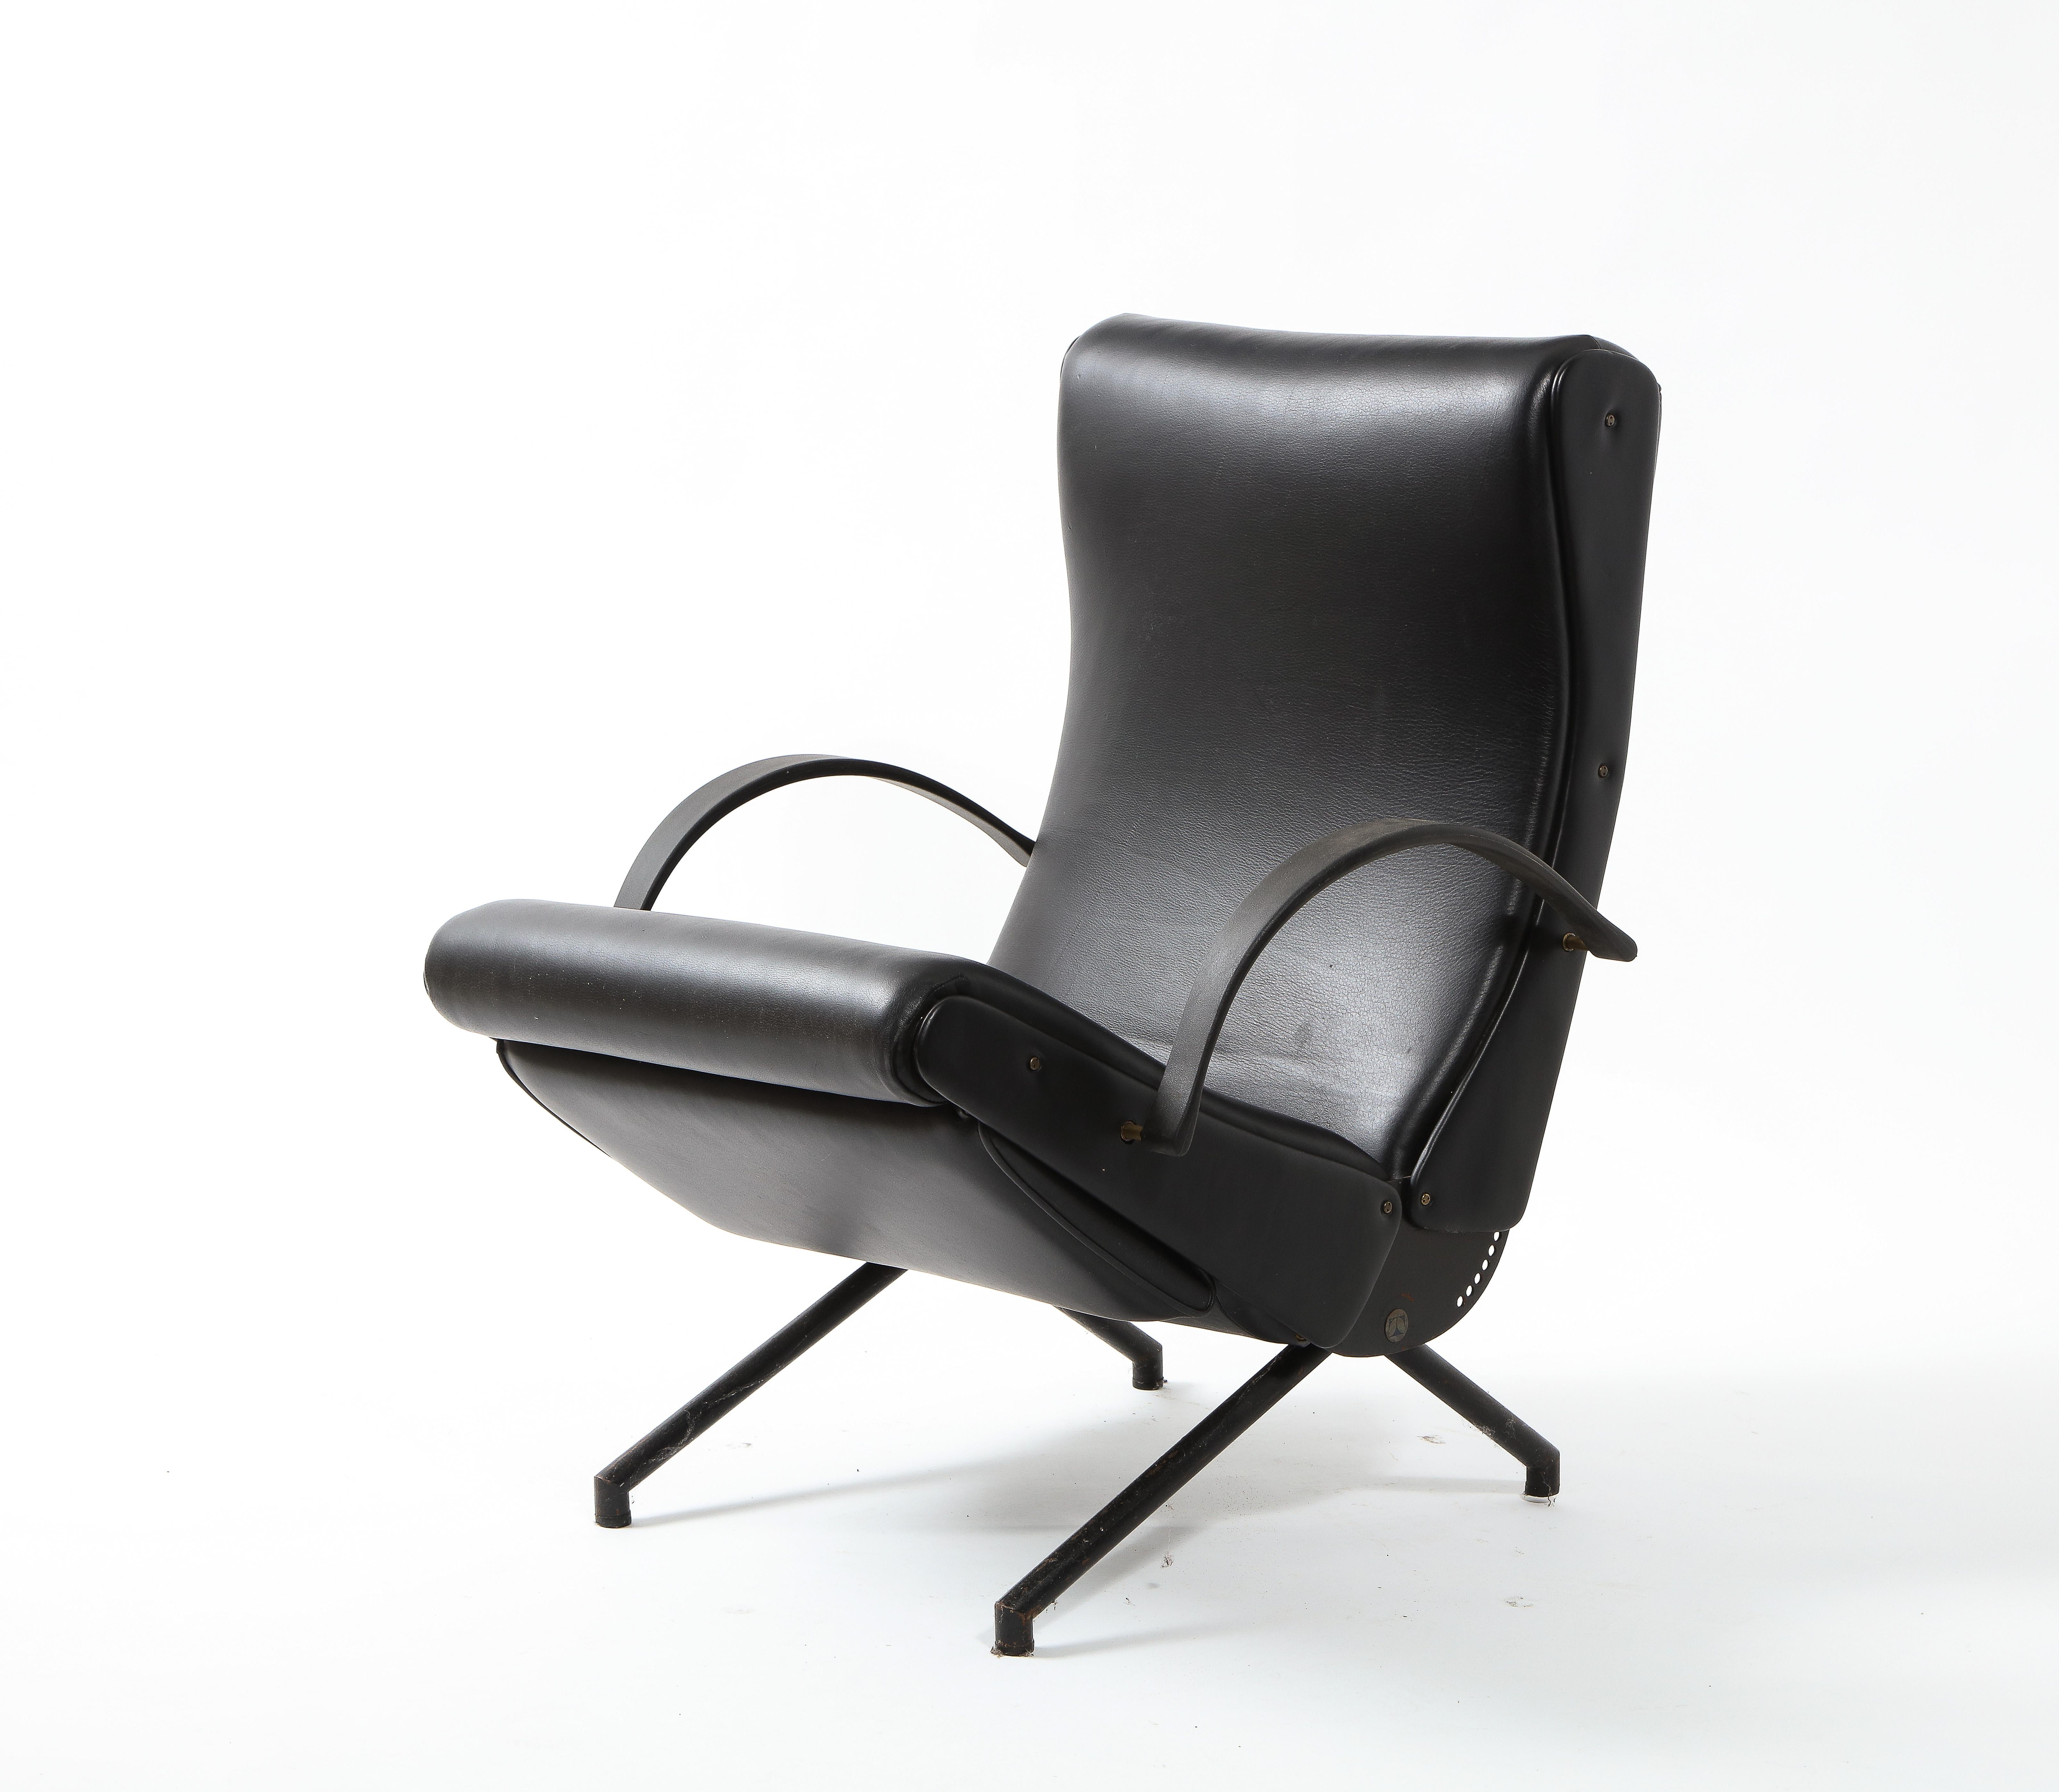 The P40 needs no introduction; a true marvel of mid-century forward-thinking, its design endures. Upholstered in black leather, another one is available for COM.